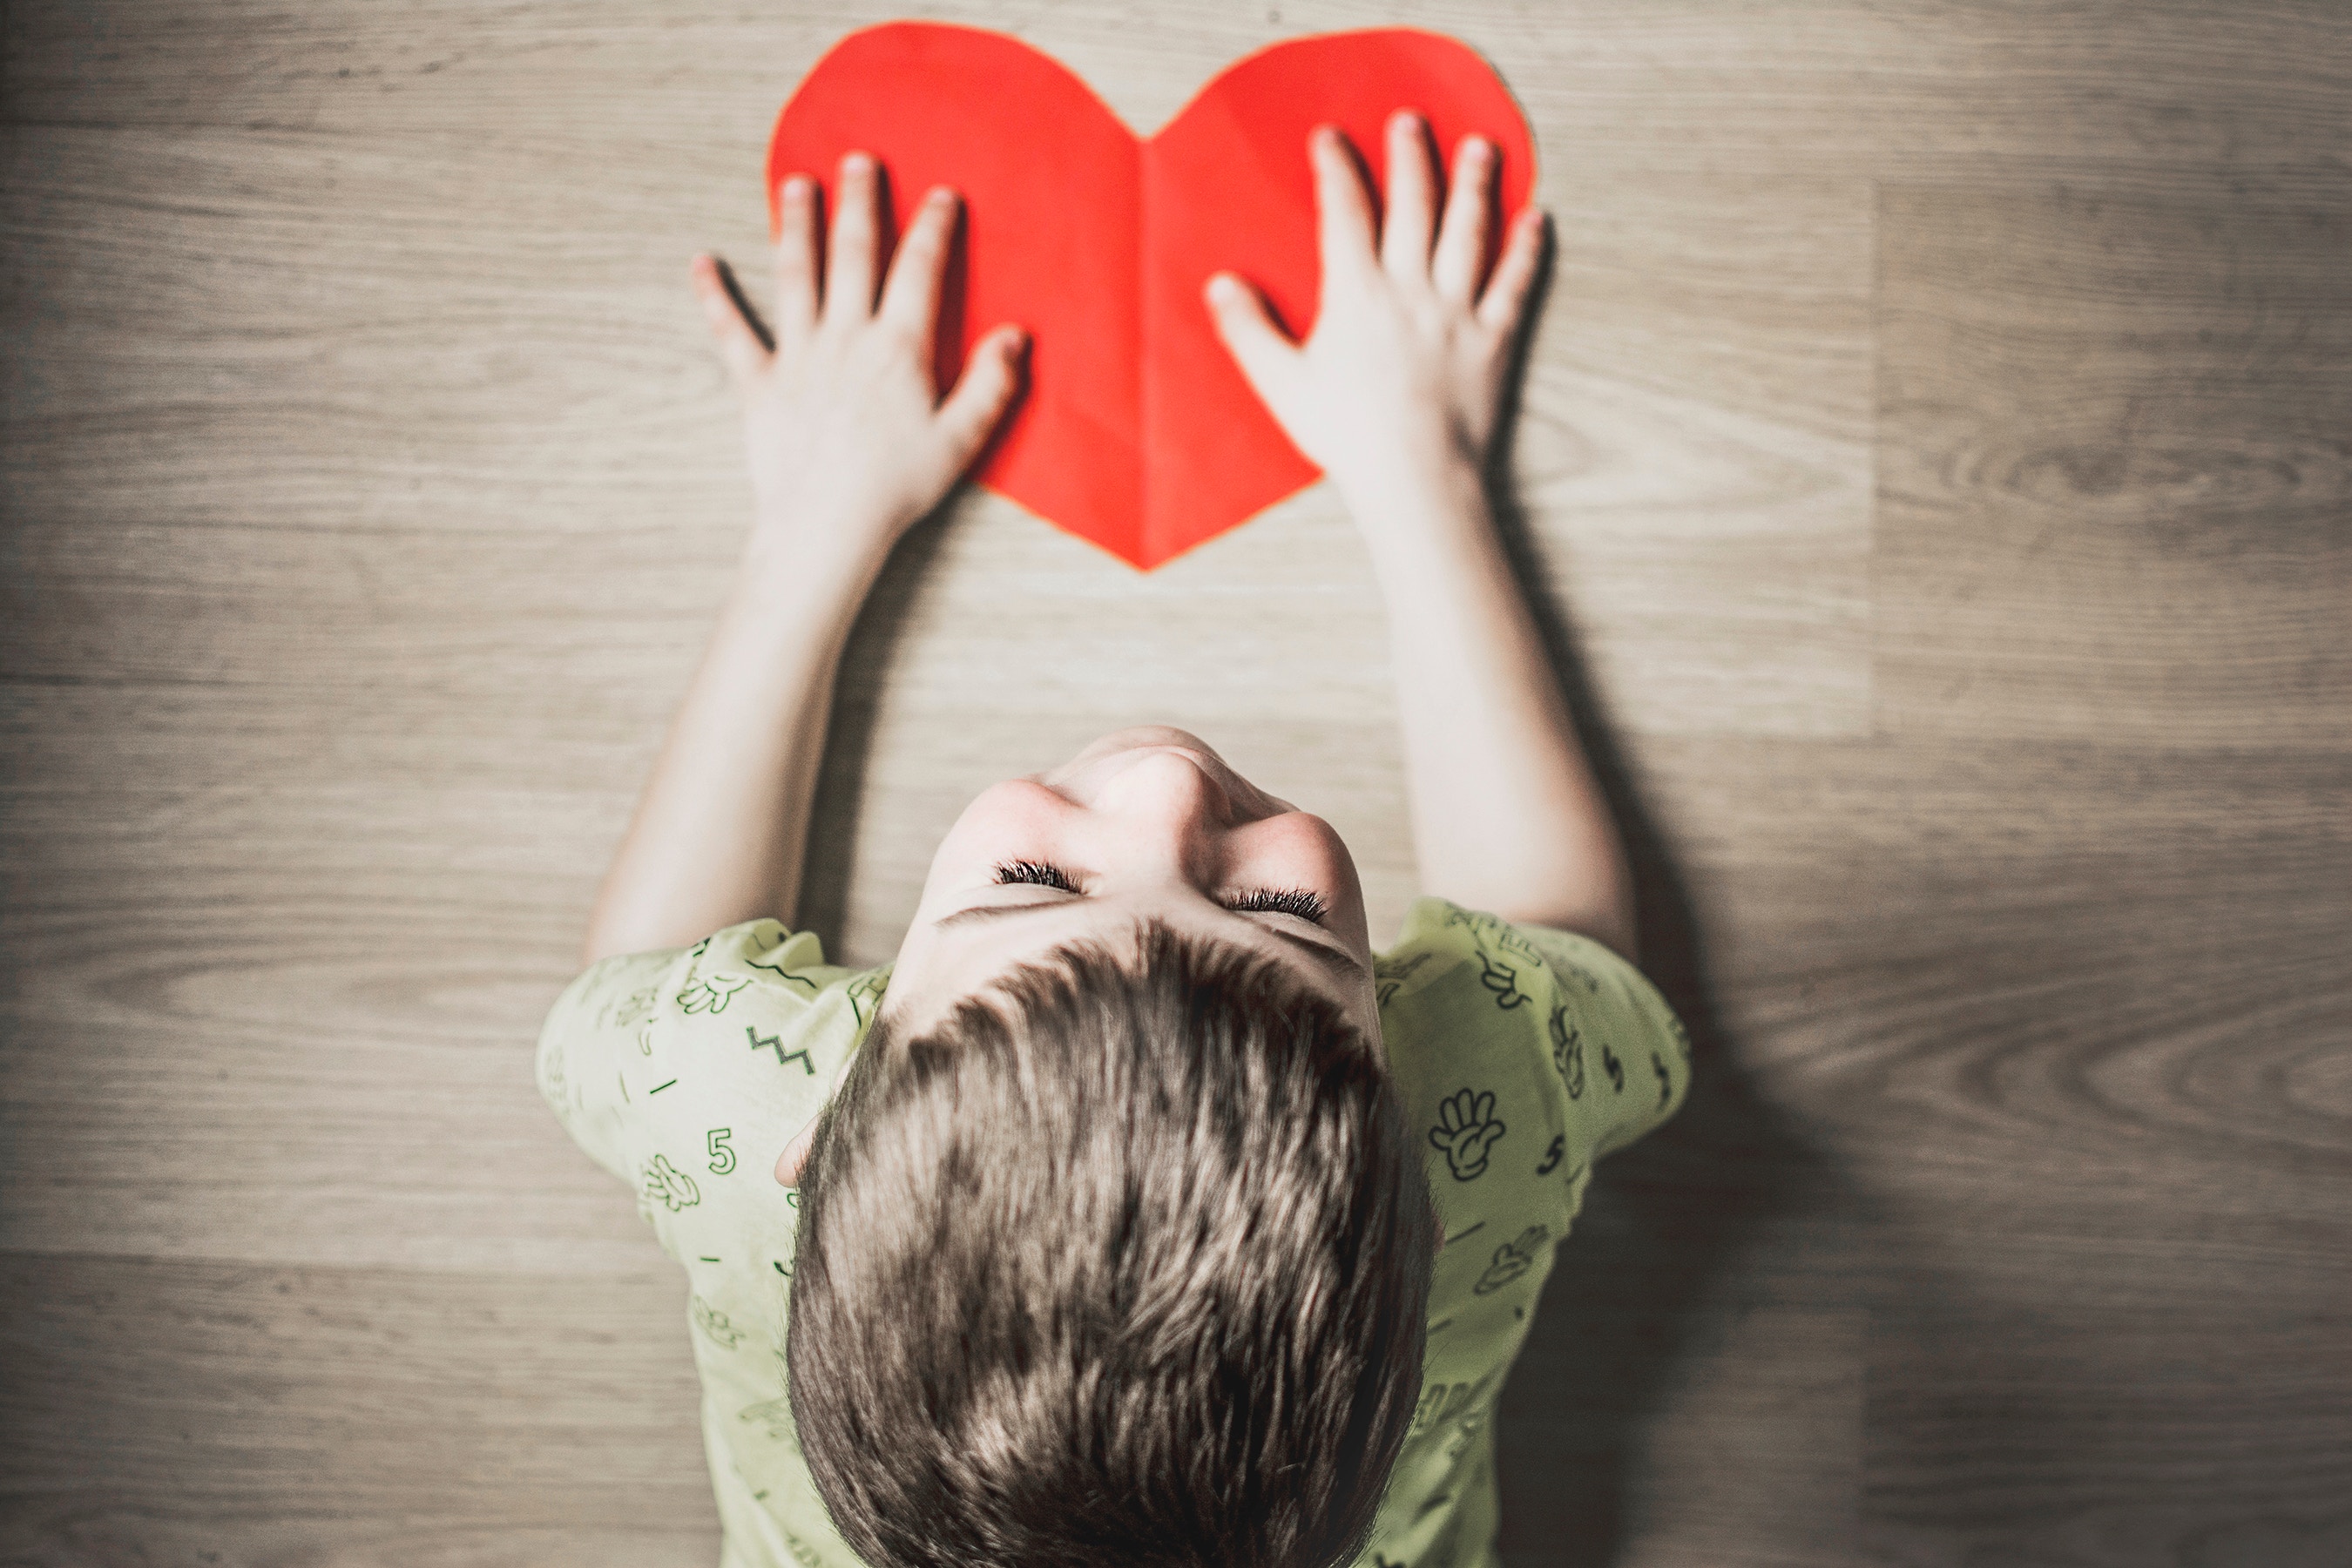 Child preventing bullying with a red heart